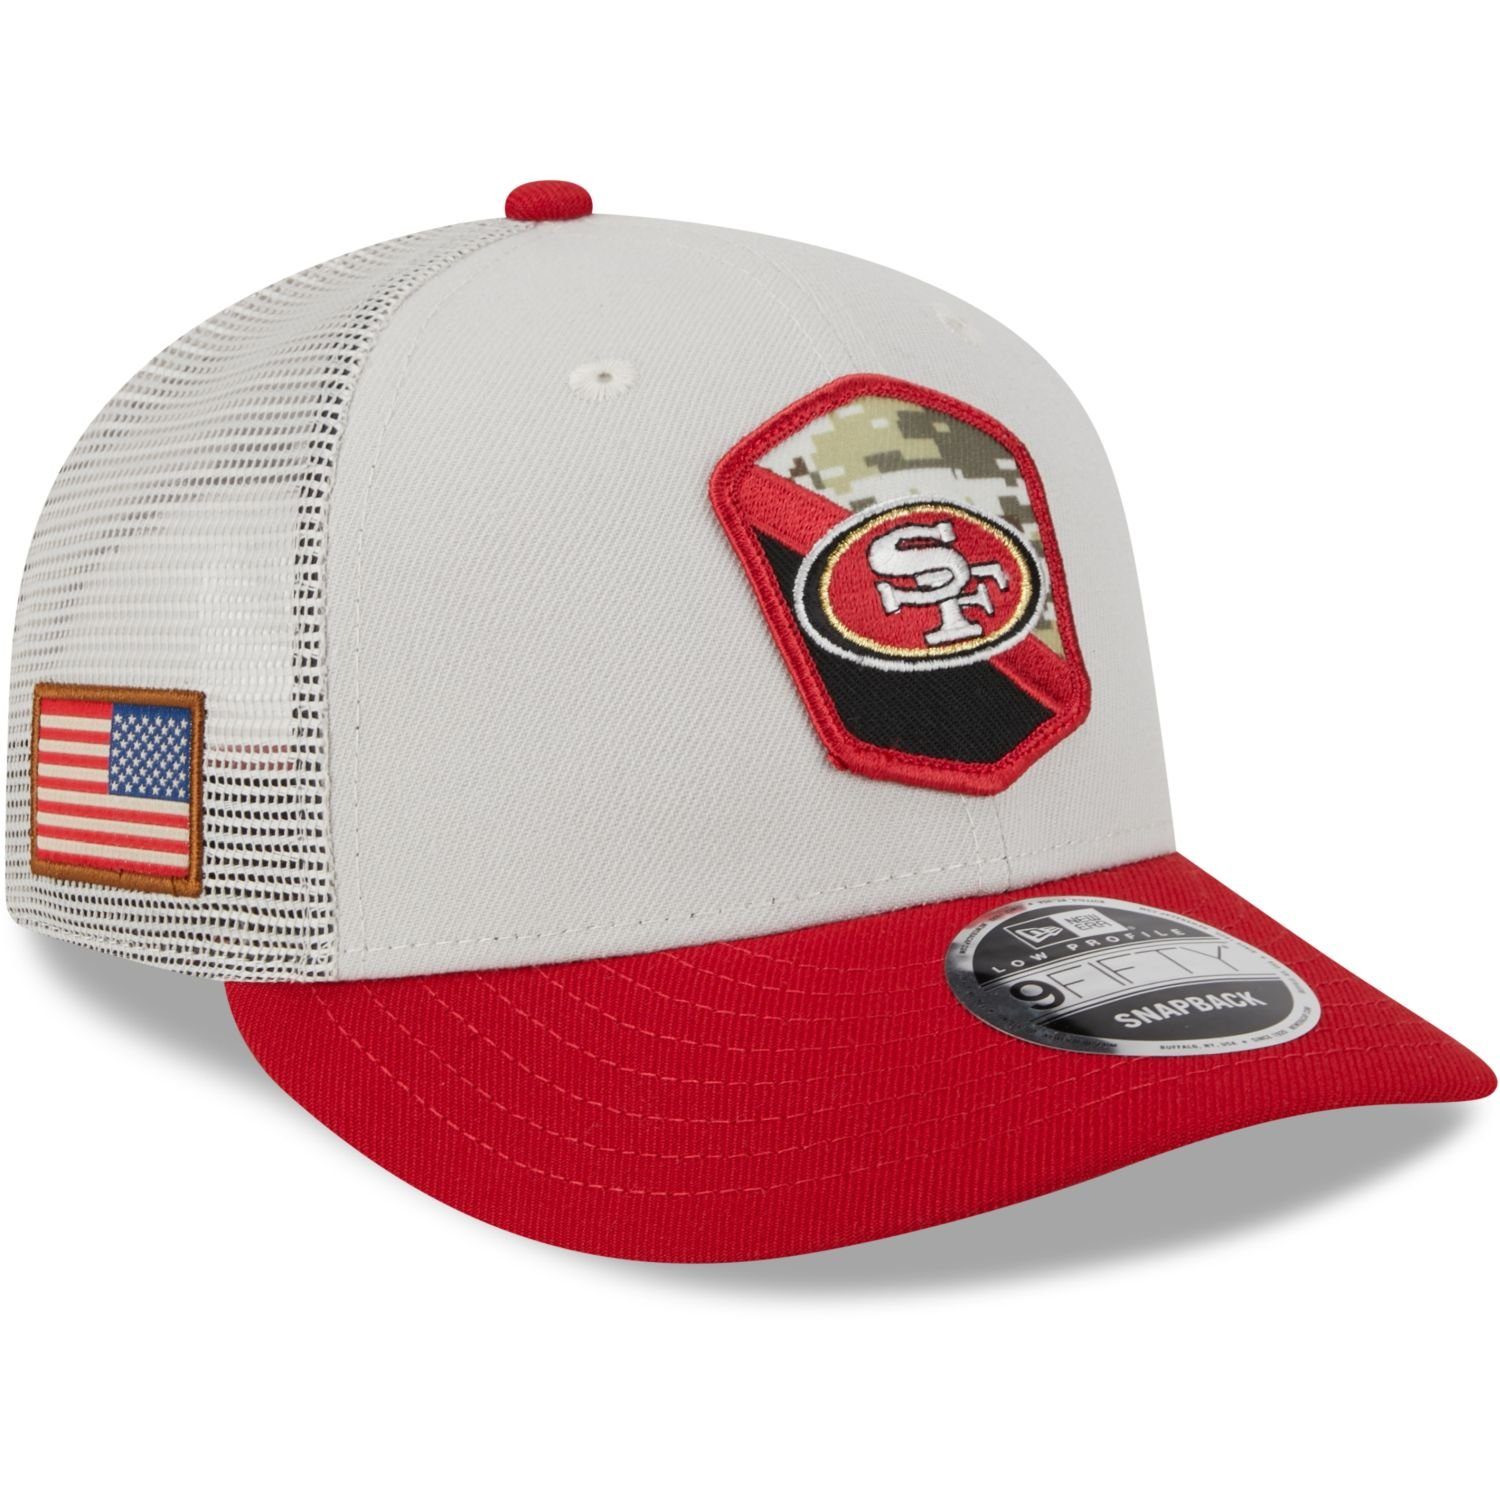 New Era Snapback Cap 9Fifty Low Profile Snap NFL Salute to Service San Francisco 49ers